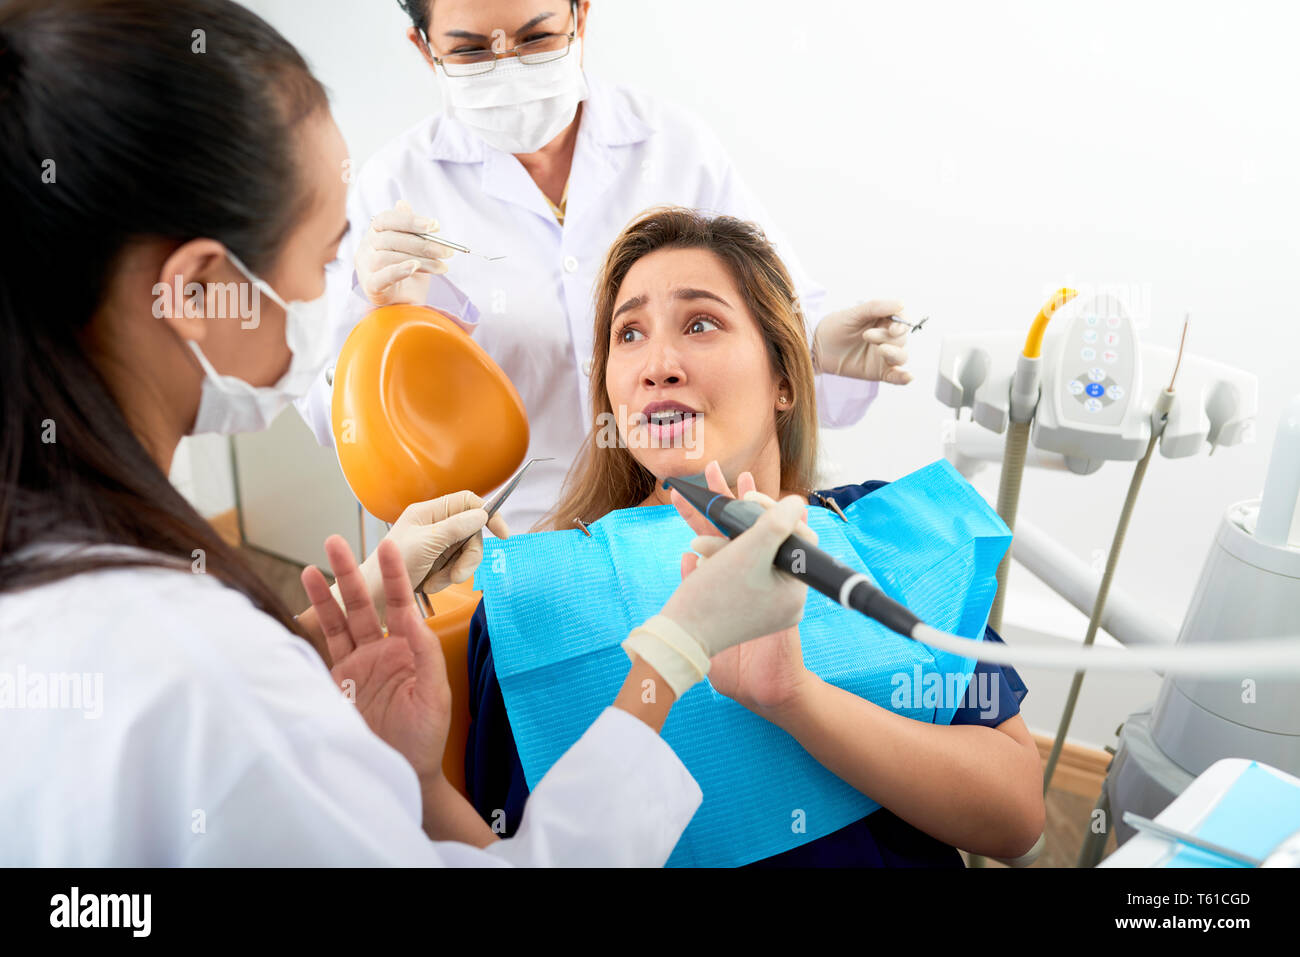 Panicking dentistry patient Stock Photo